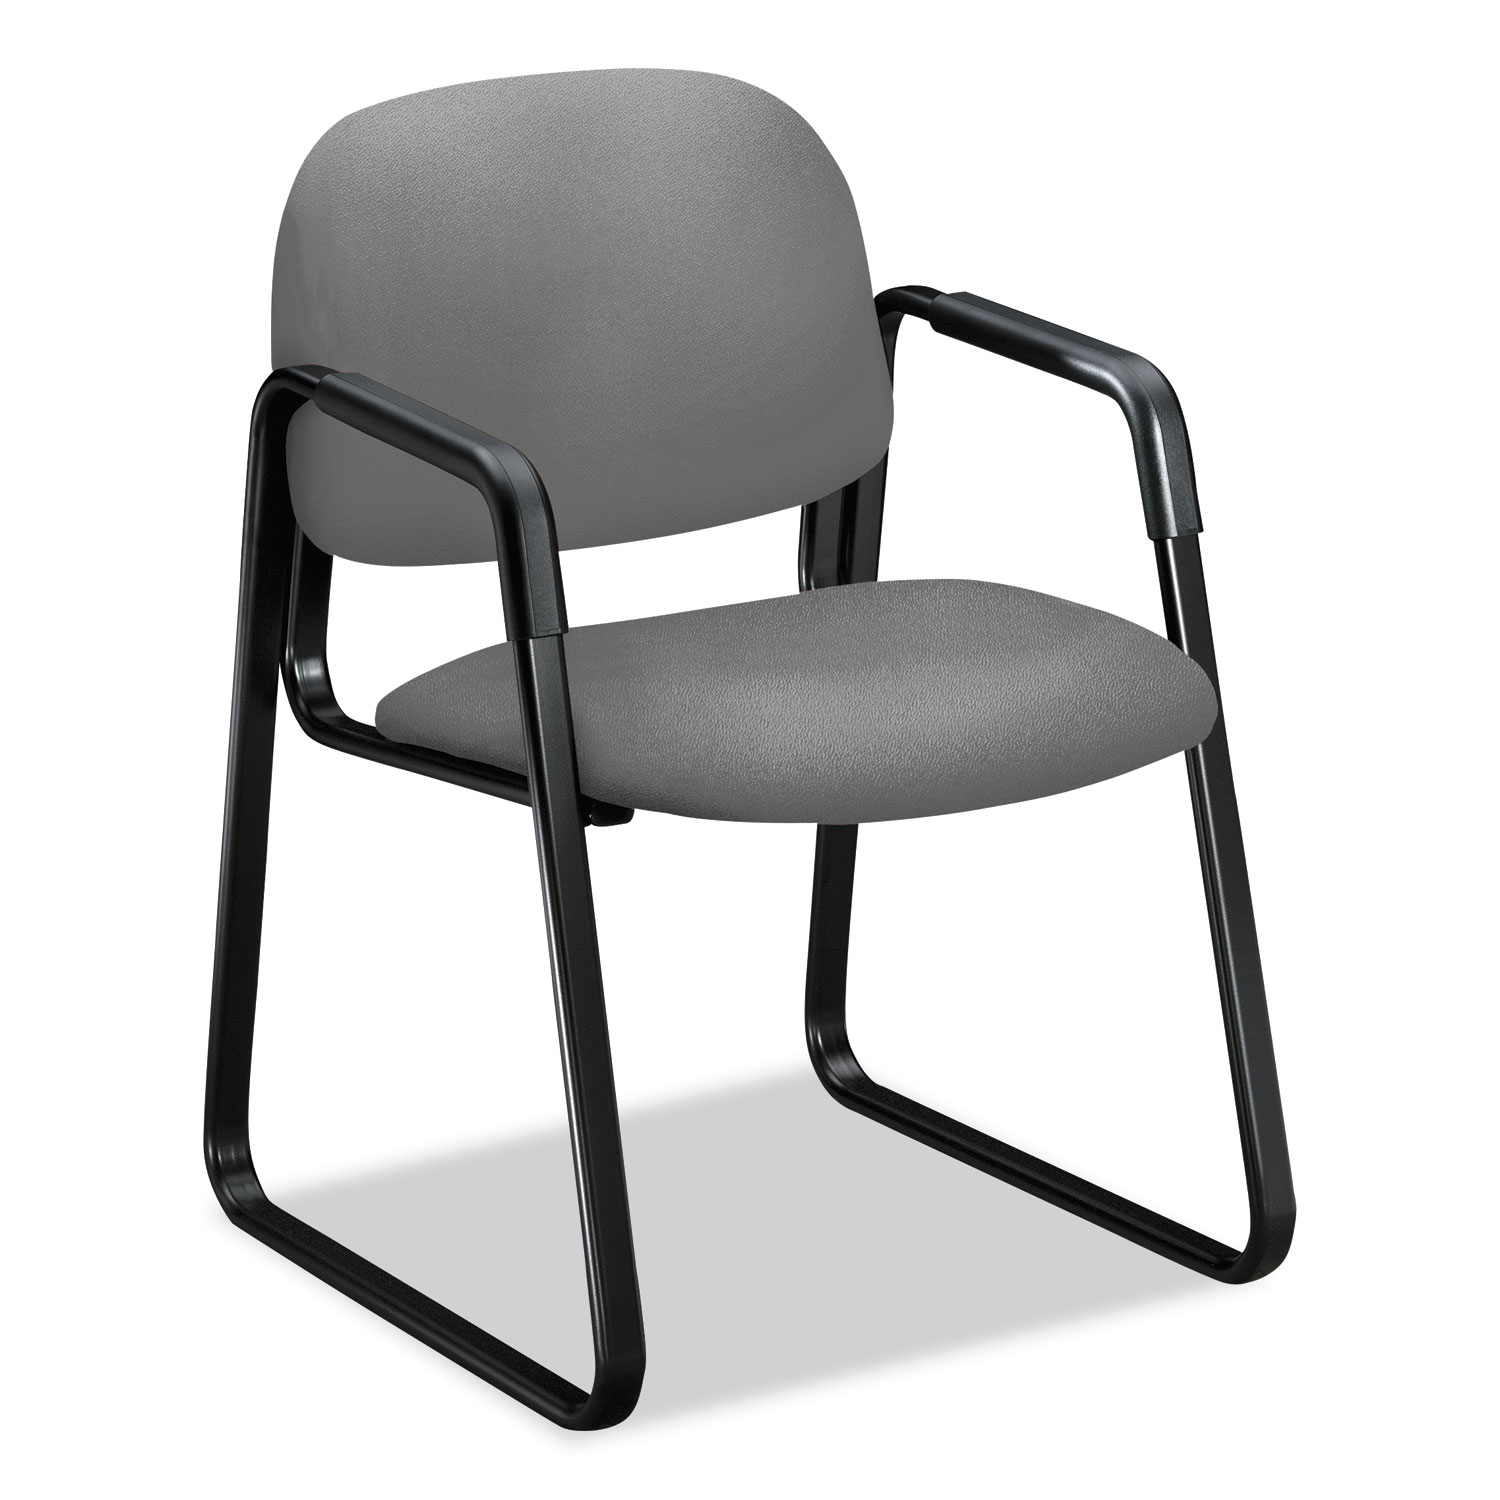  HON HON4008CU22T Solutions Seating 4000 Series Sled Base Guest Chair, 23.5 x 25.5 x 33, Frost Seat, Frost Back, Black Base (HON4008CU22T) 